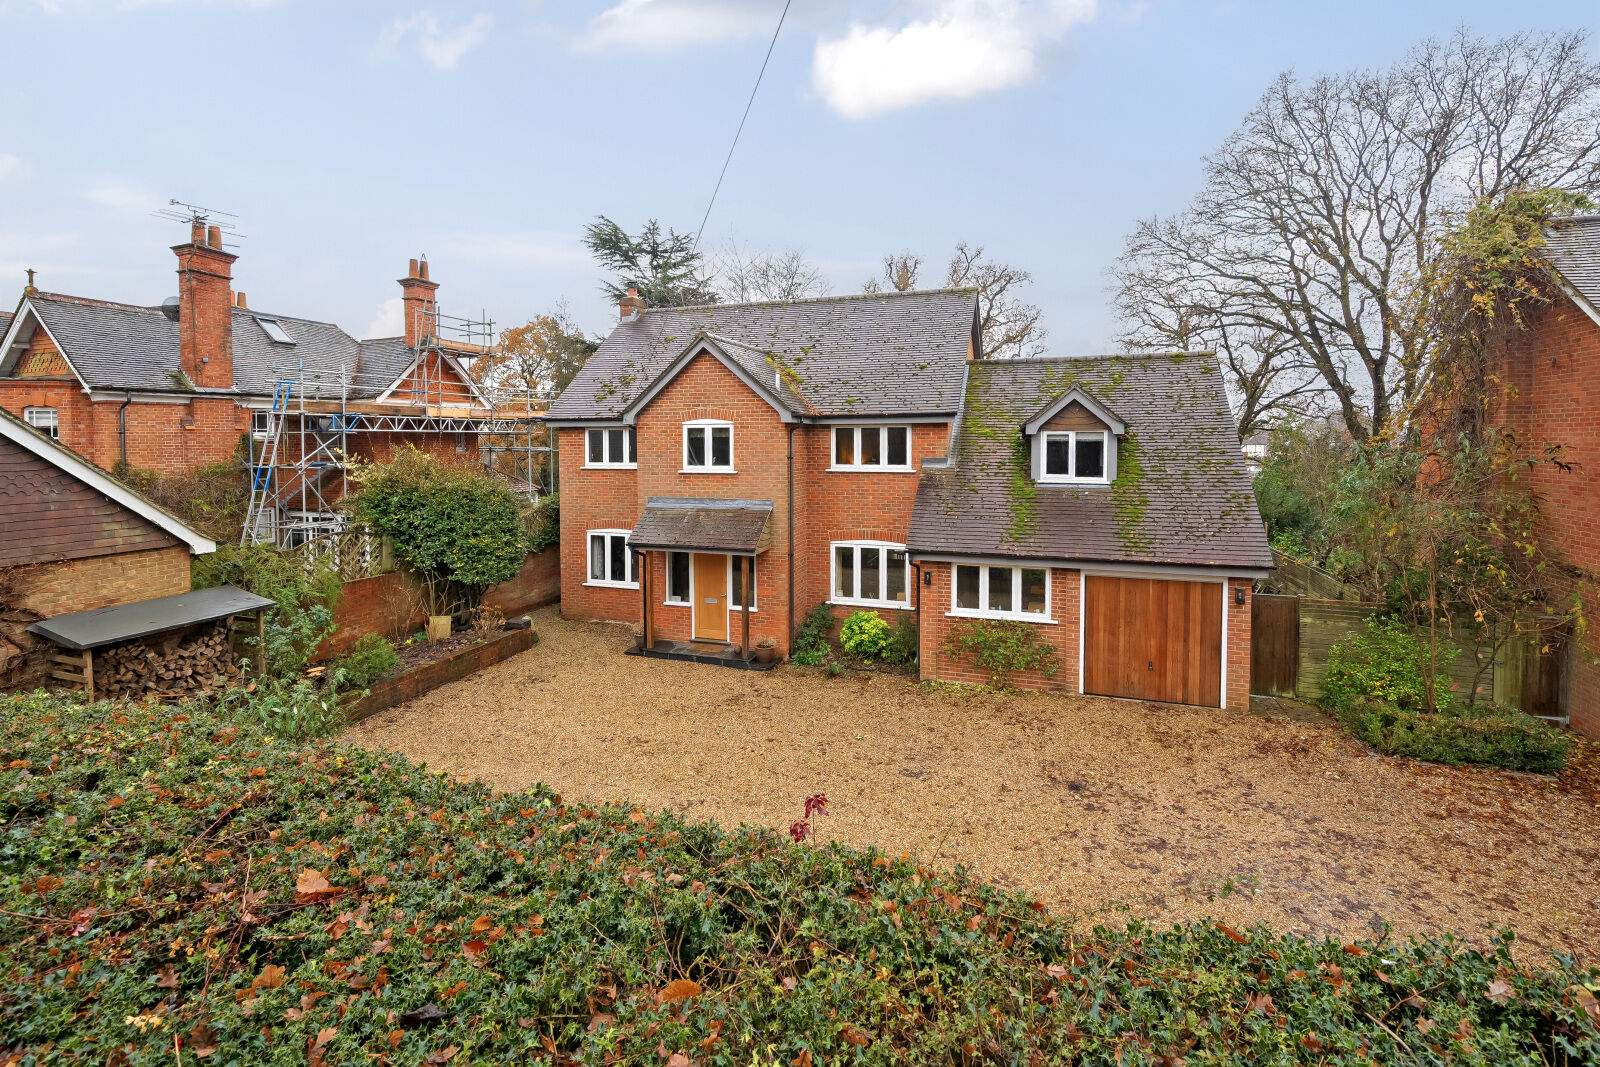 4 bedroom detached house for sale Blounts Court Road, Peppard Common, RG9, main image